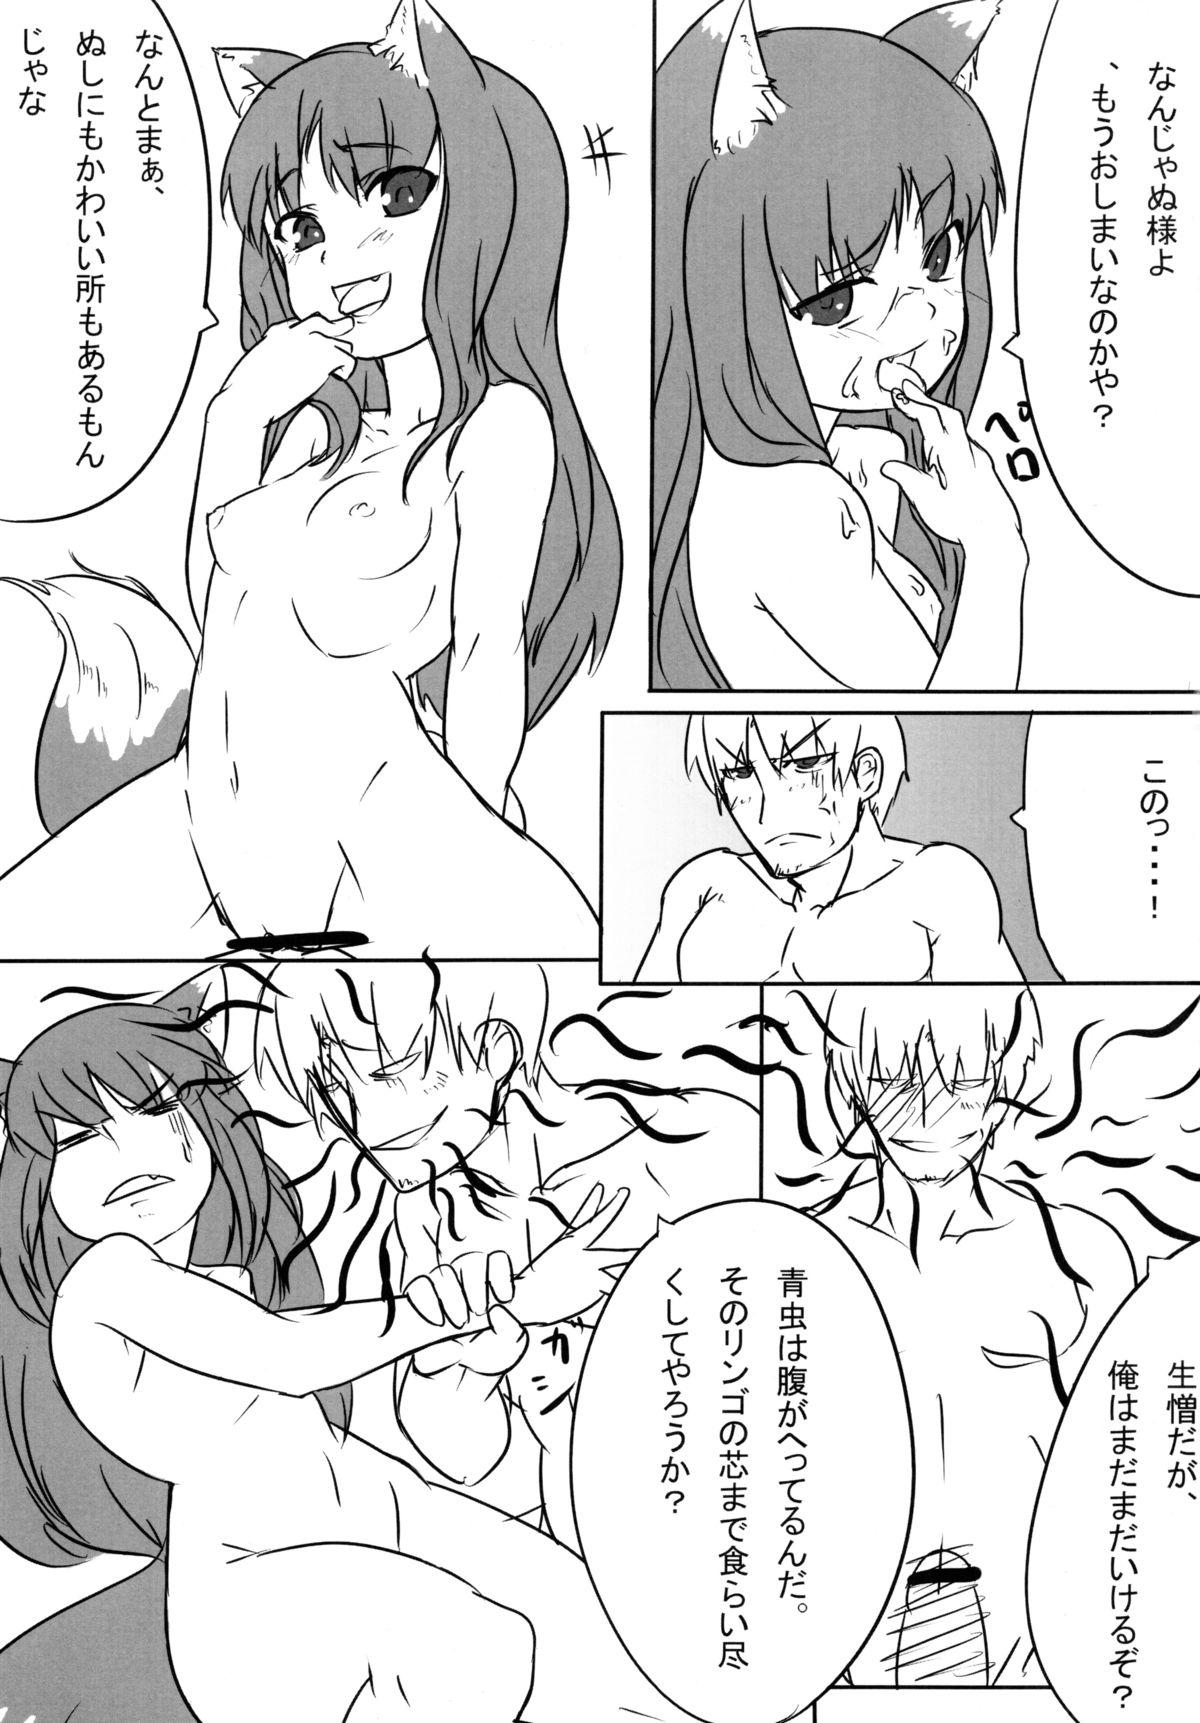 Pain Ookamito Koushinryou IIKB - Spice and wolf Parties - Page 11